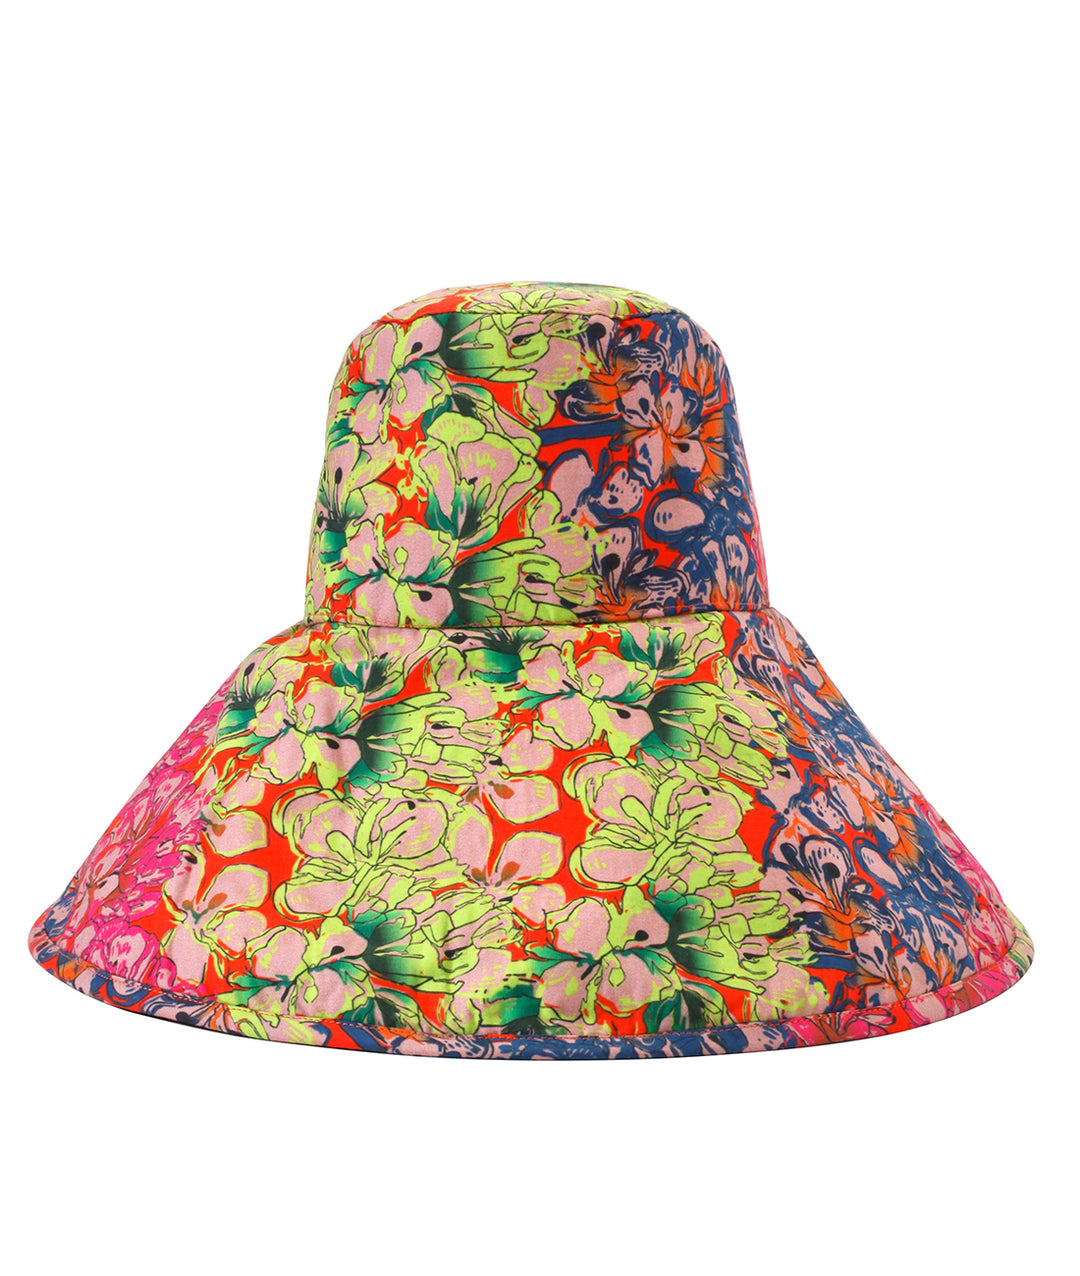 Floral Recycled Cotton Beach Hat